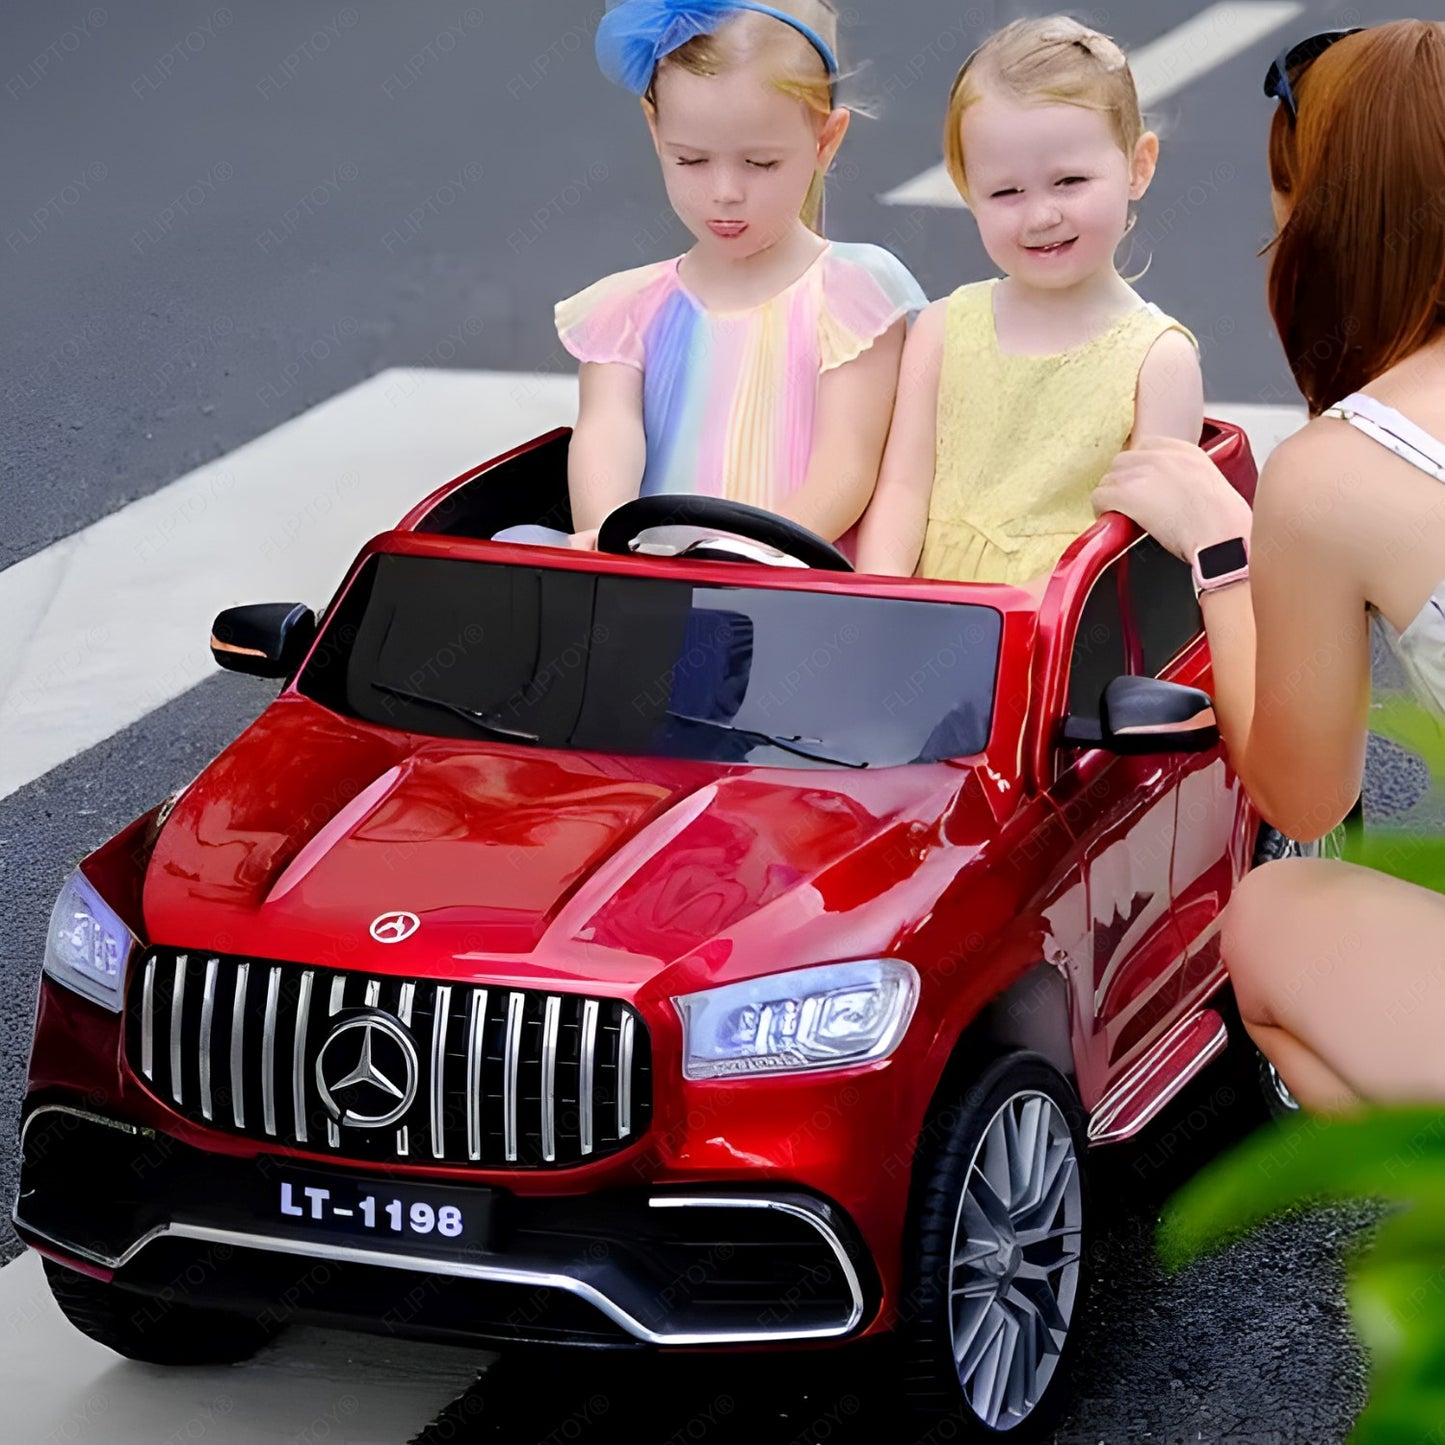 Baby SUV stylish ride on | 12v battery oprated | SUV style 2 seater baby car | Metallic color